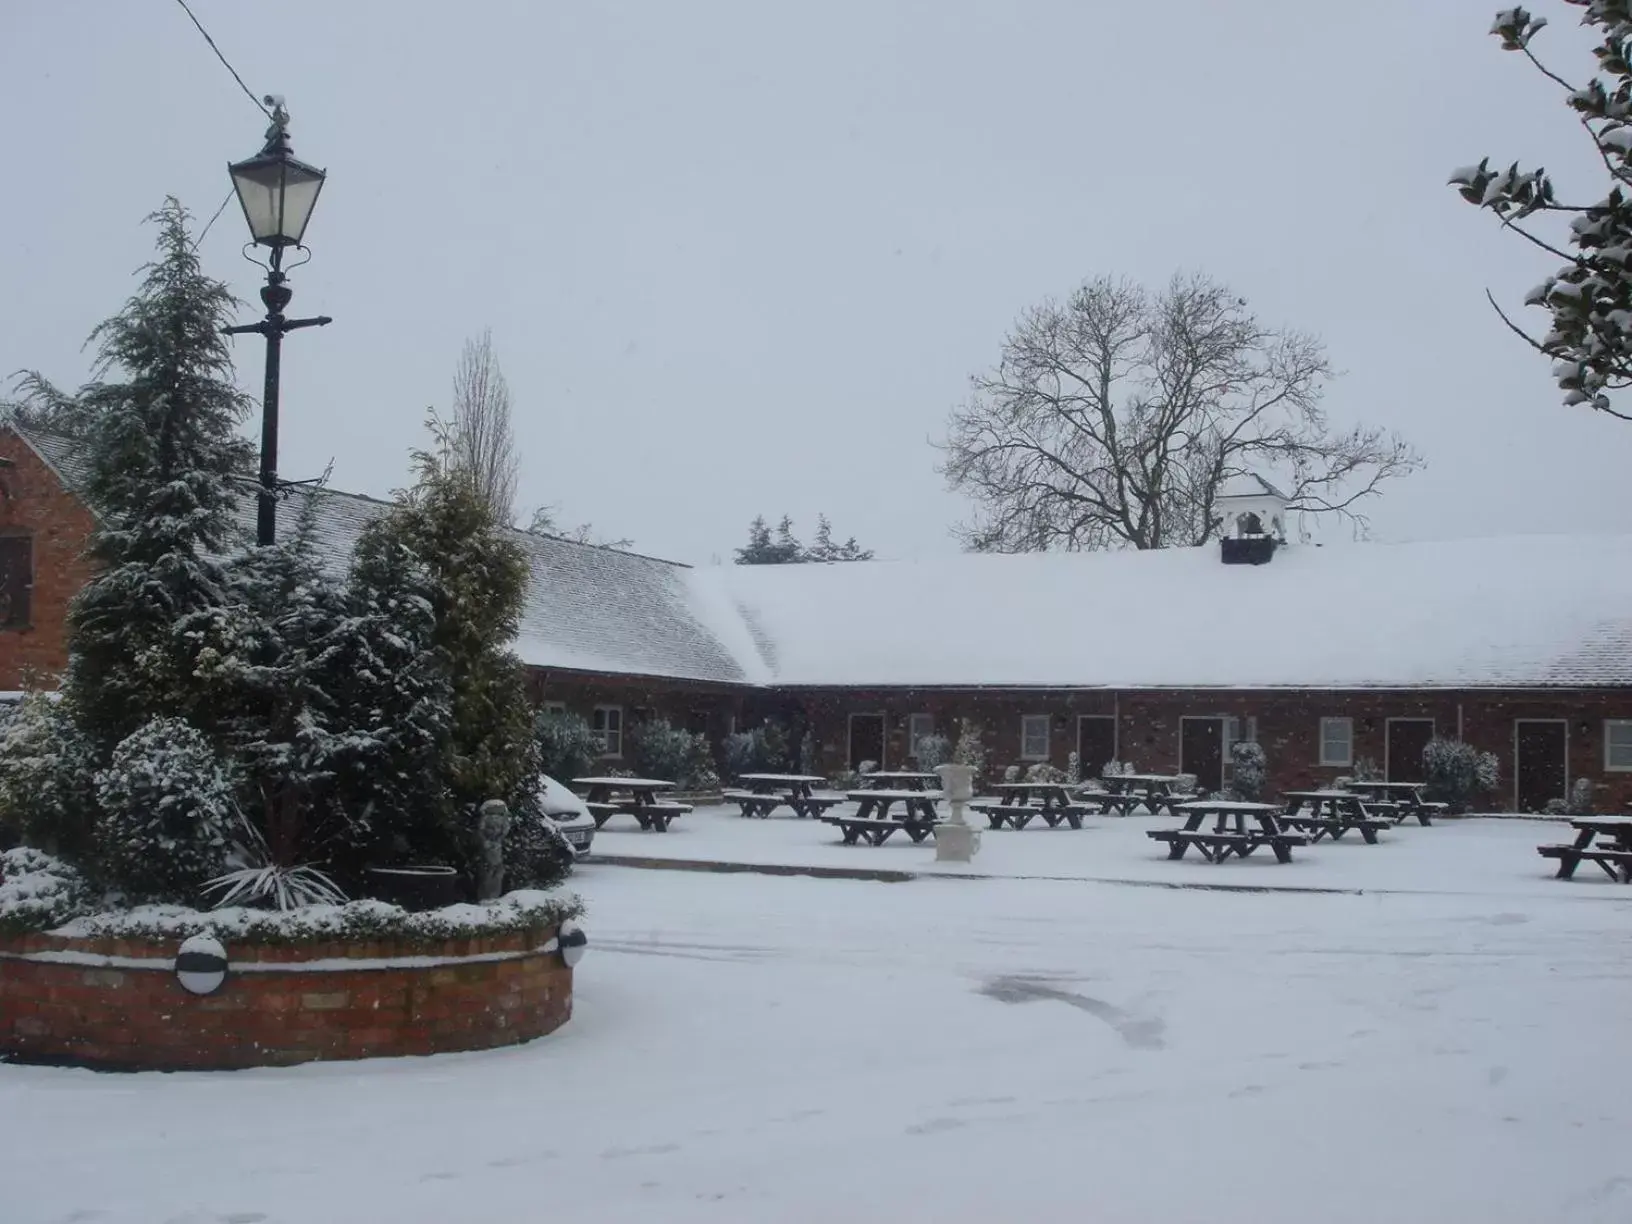 Property building, Winter in The Royal Arms Hotel